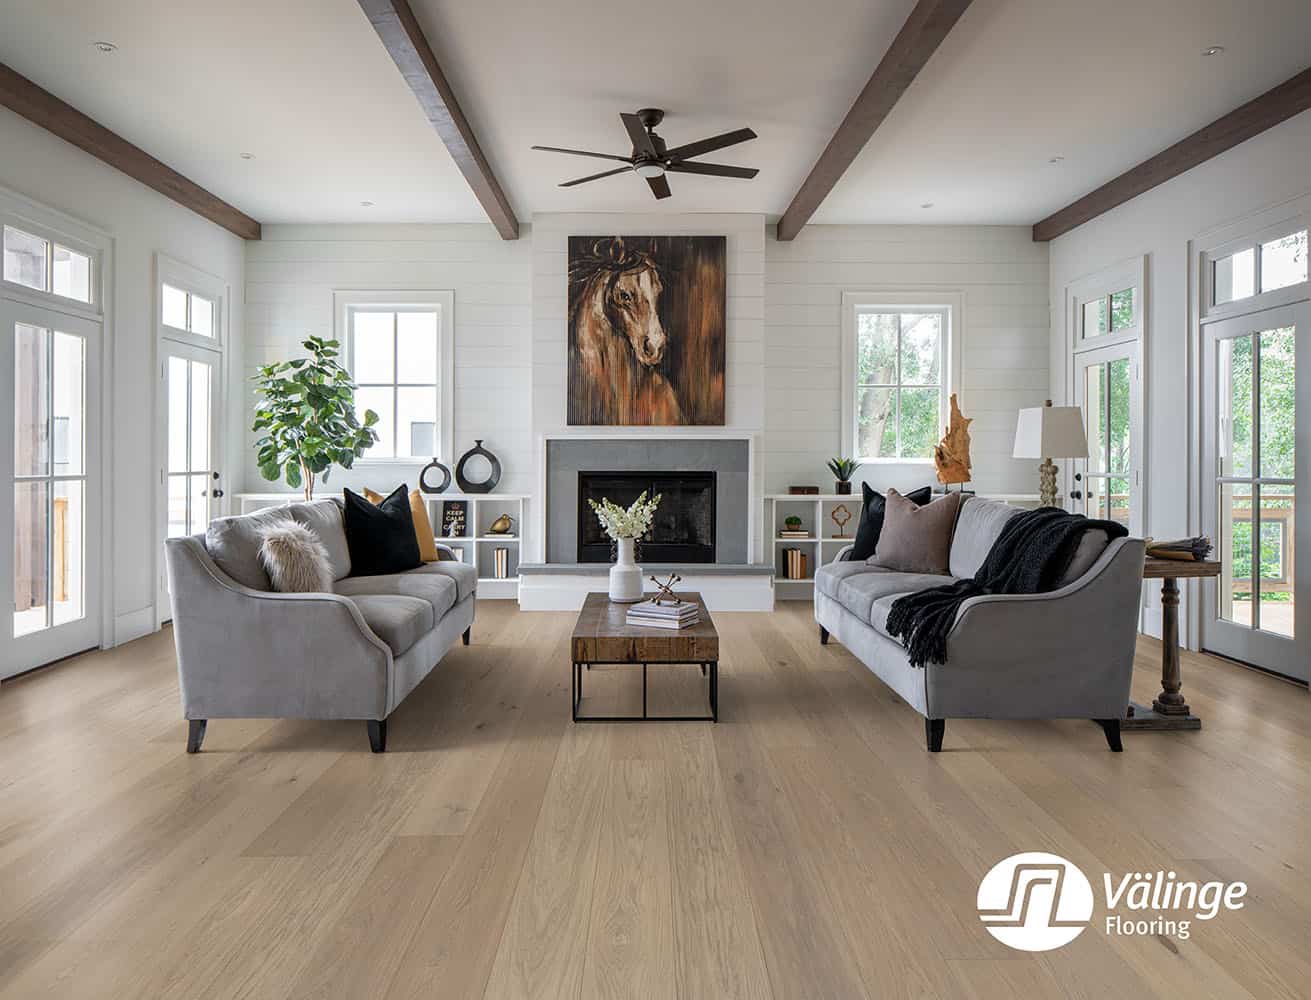 Real Wood Flooring Misty White Oak, What Is The Strongest Wood Flooring